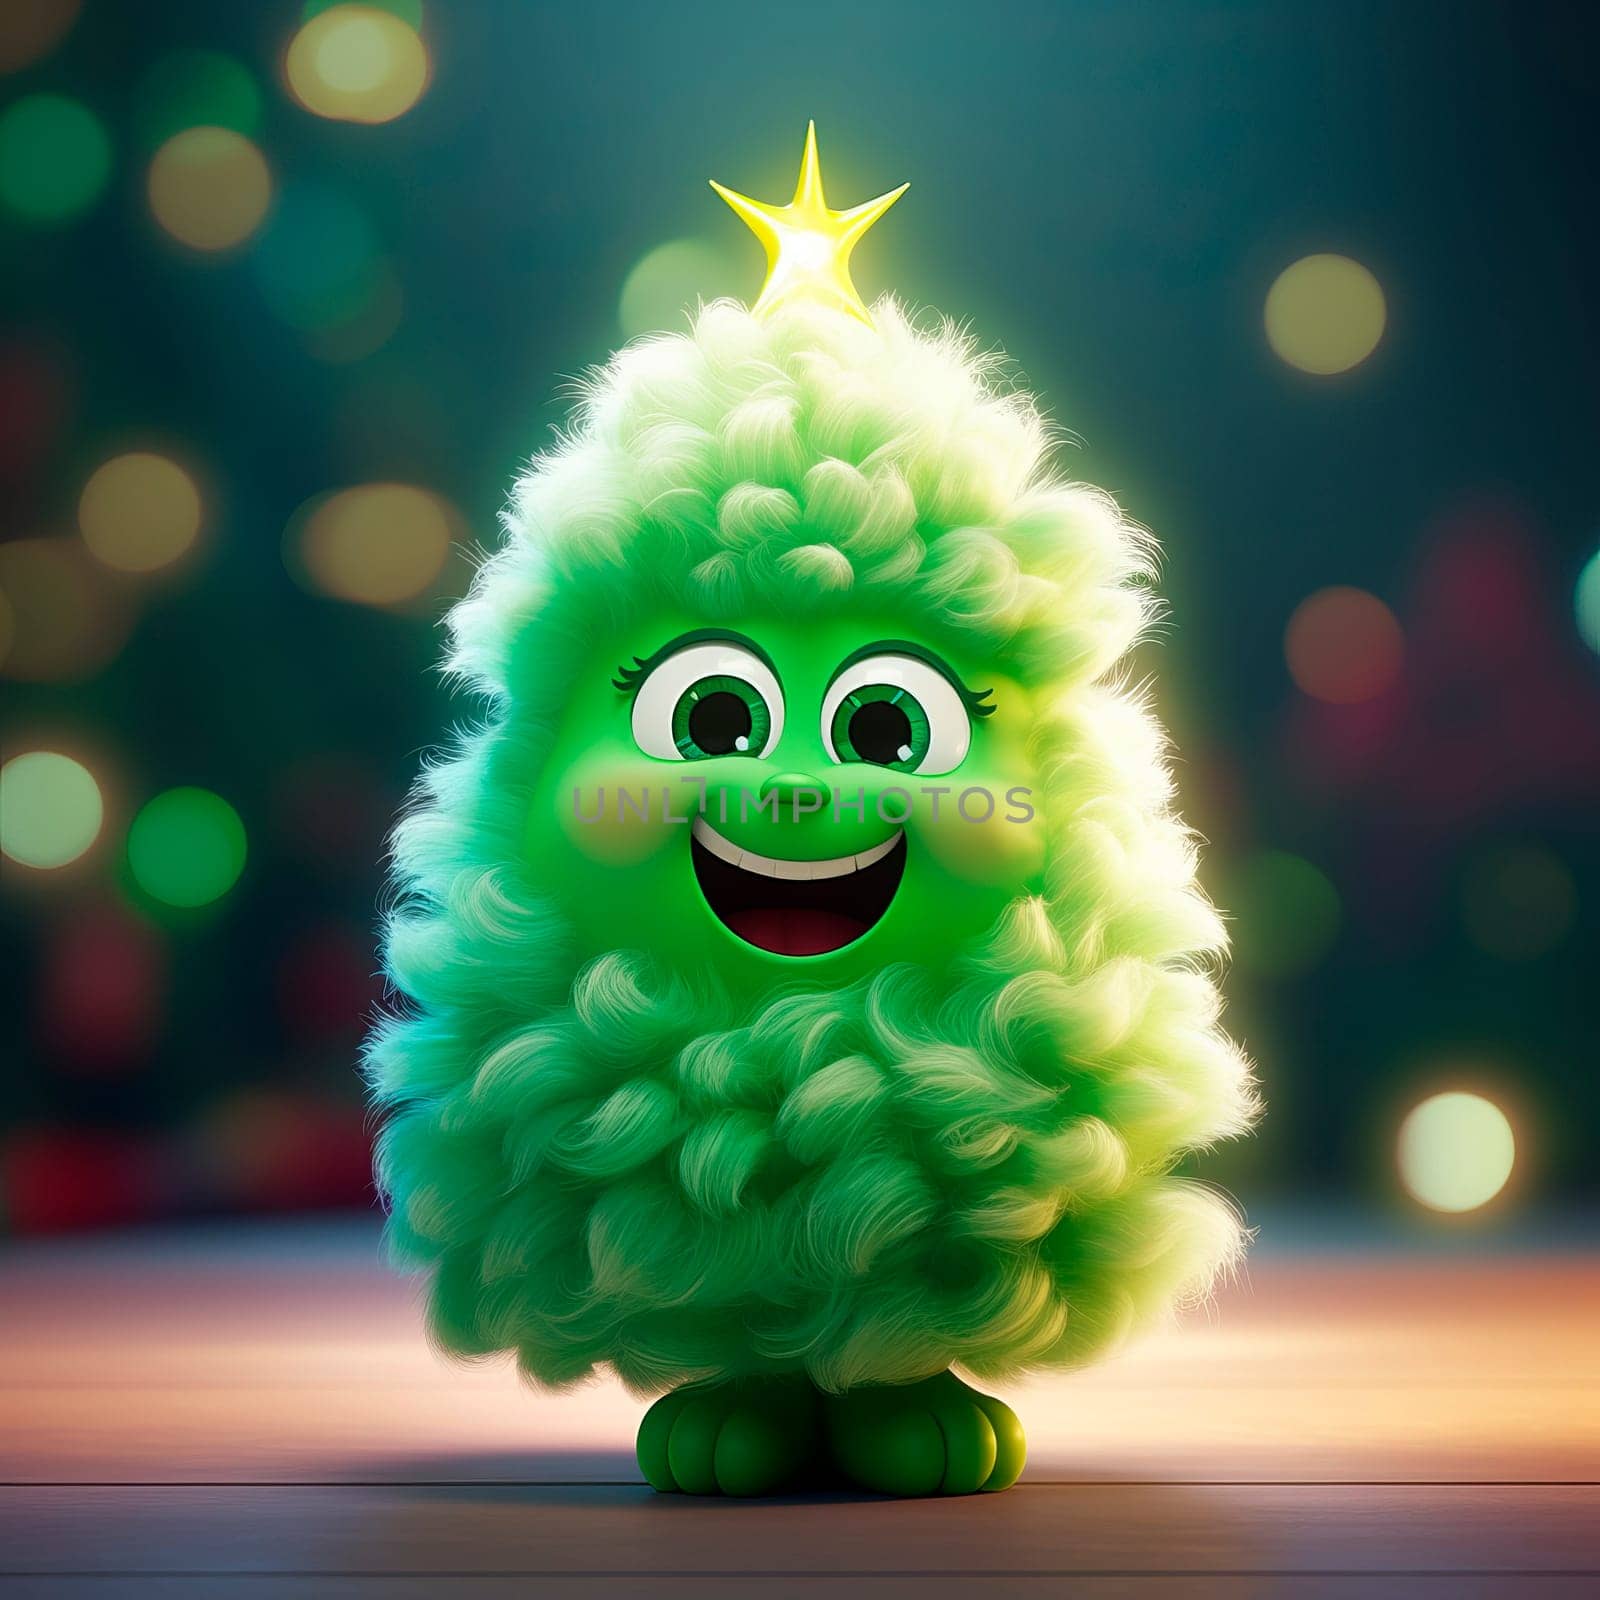 Cute Christmas tree on a New Year background by Spirina